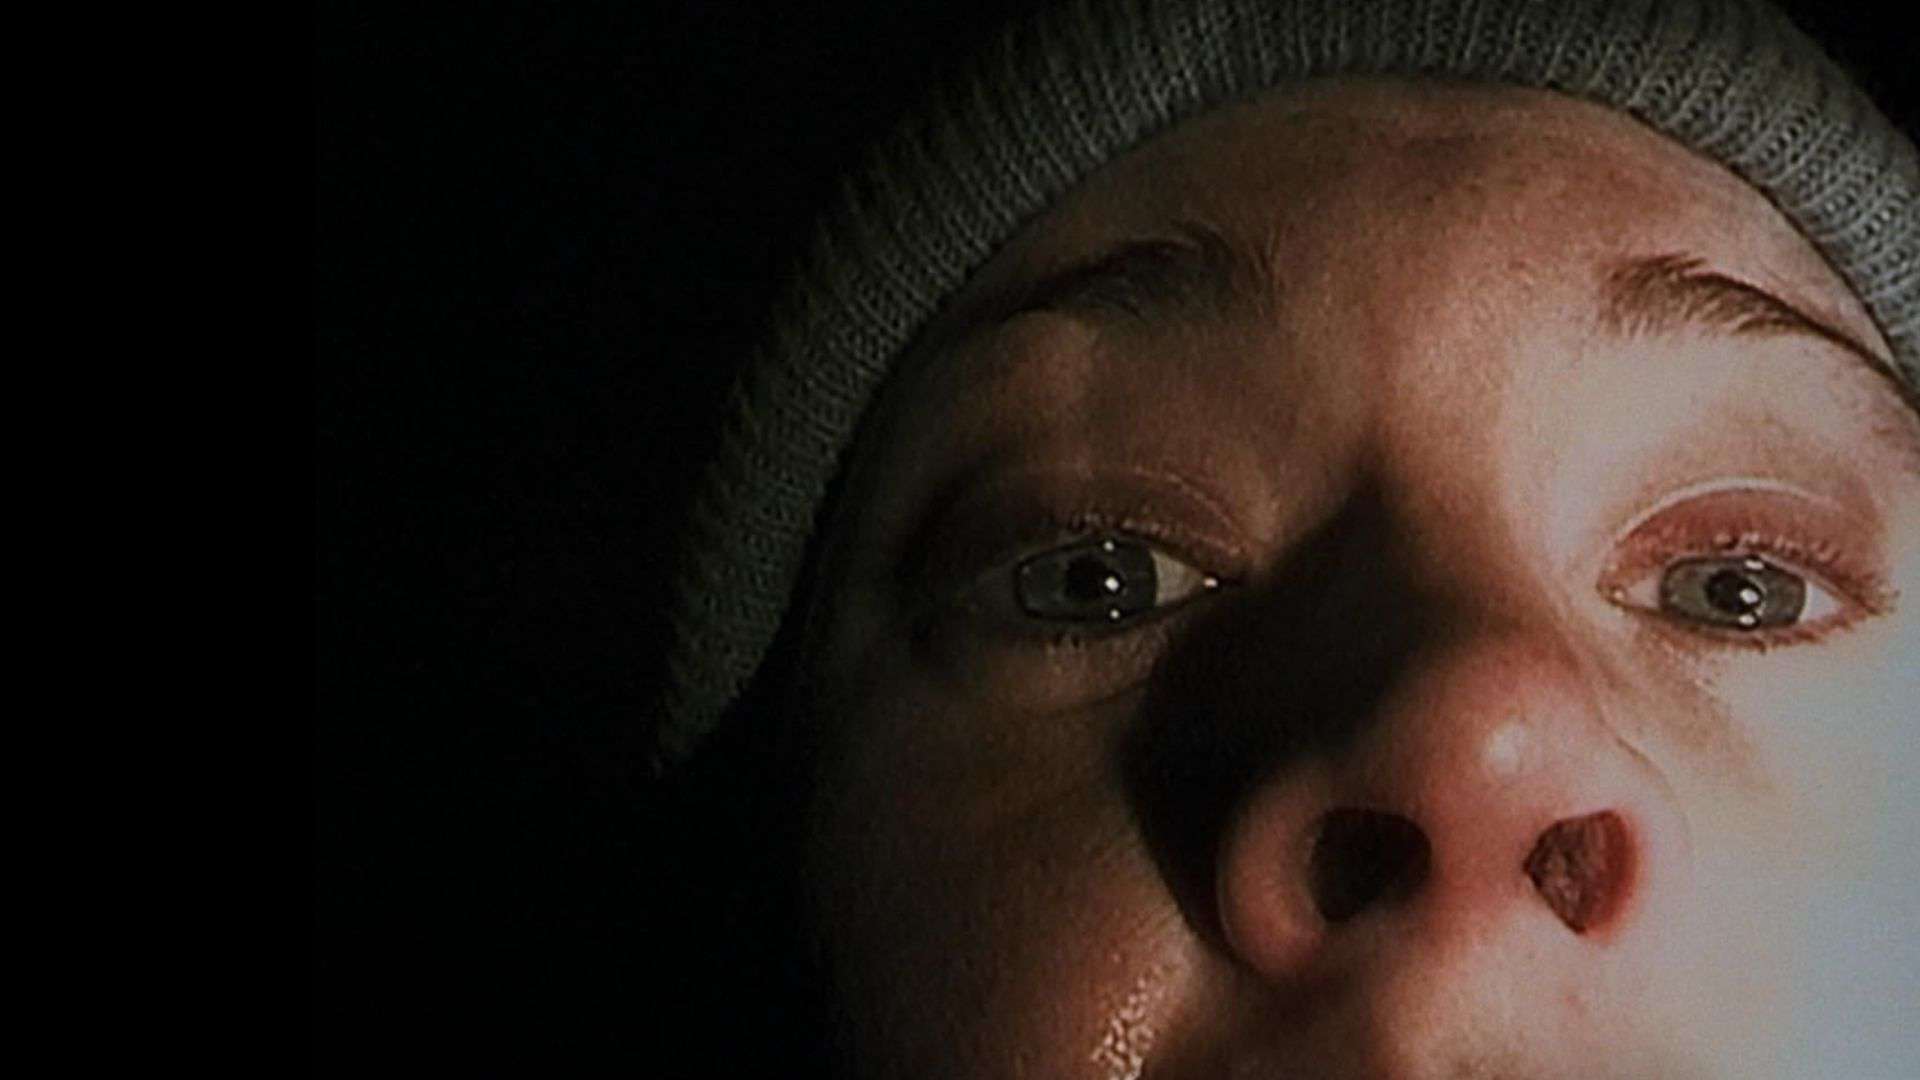 A close-up of a woman crying in this image from Haxan Films